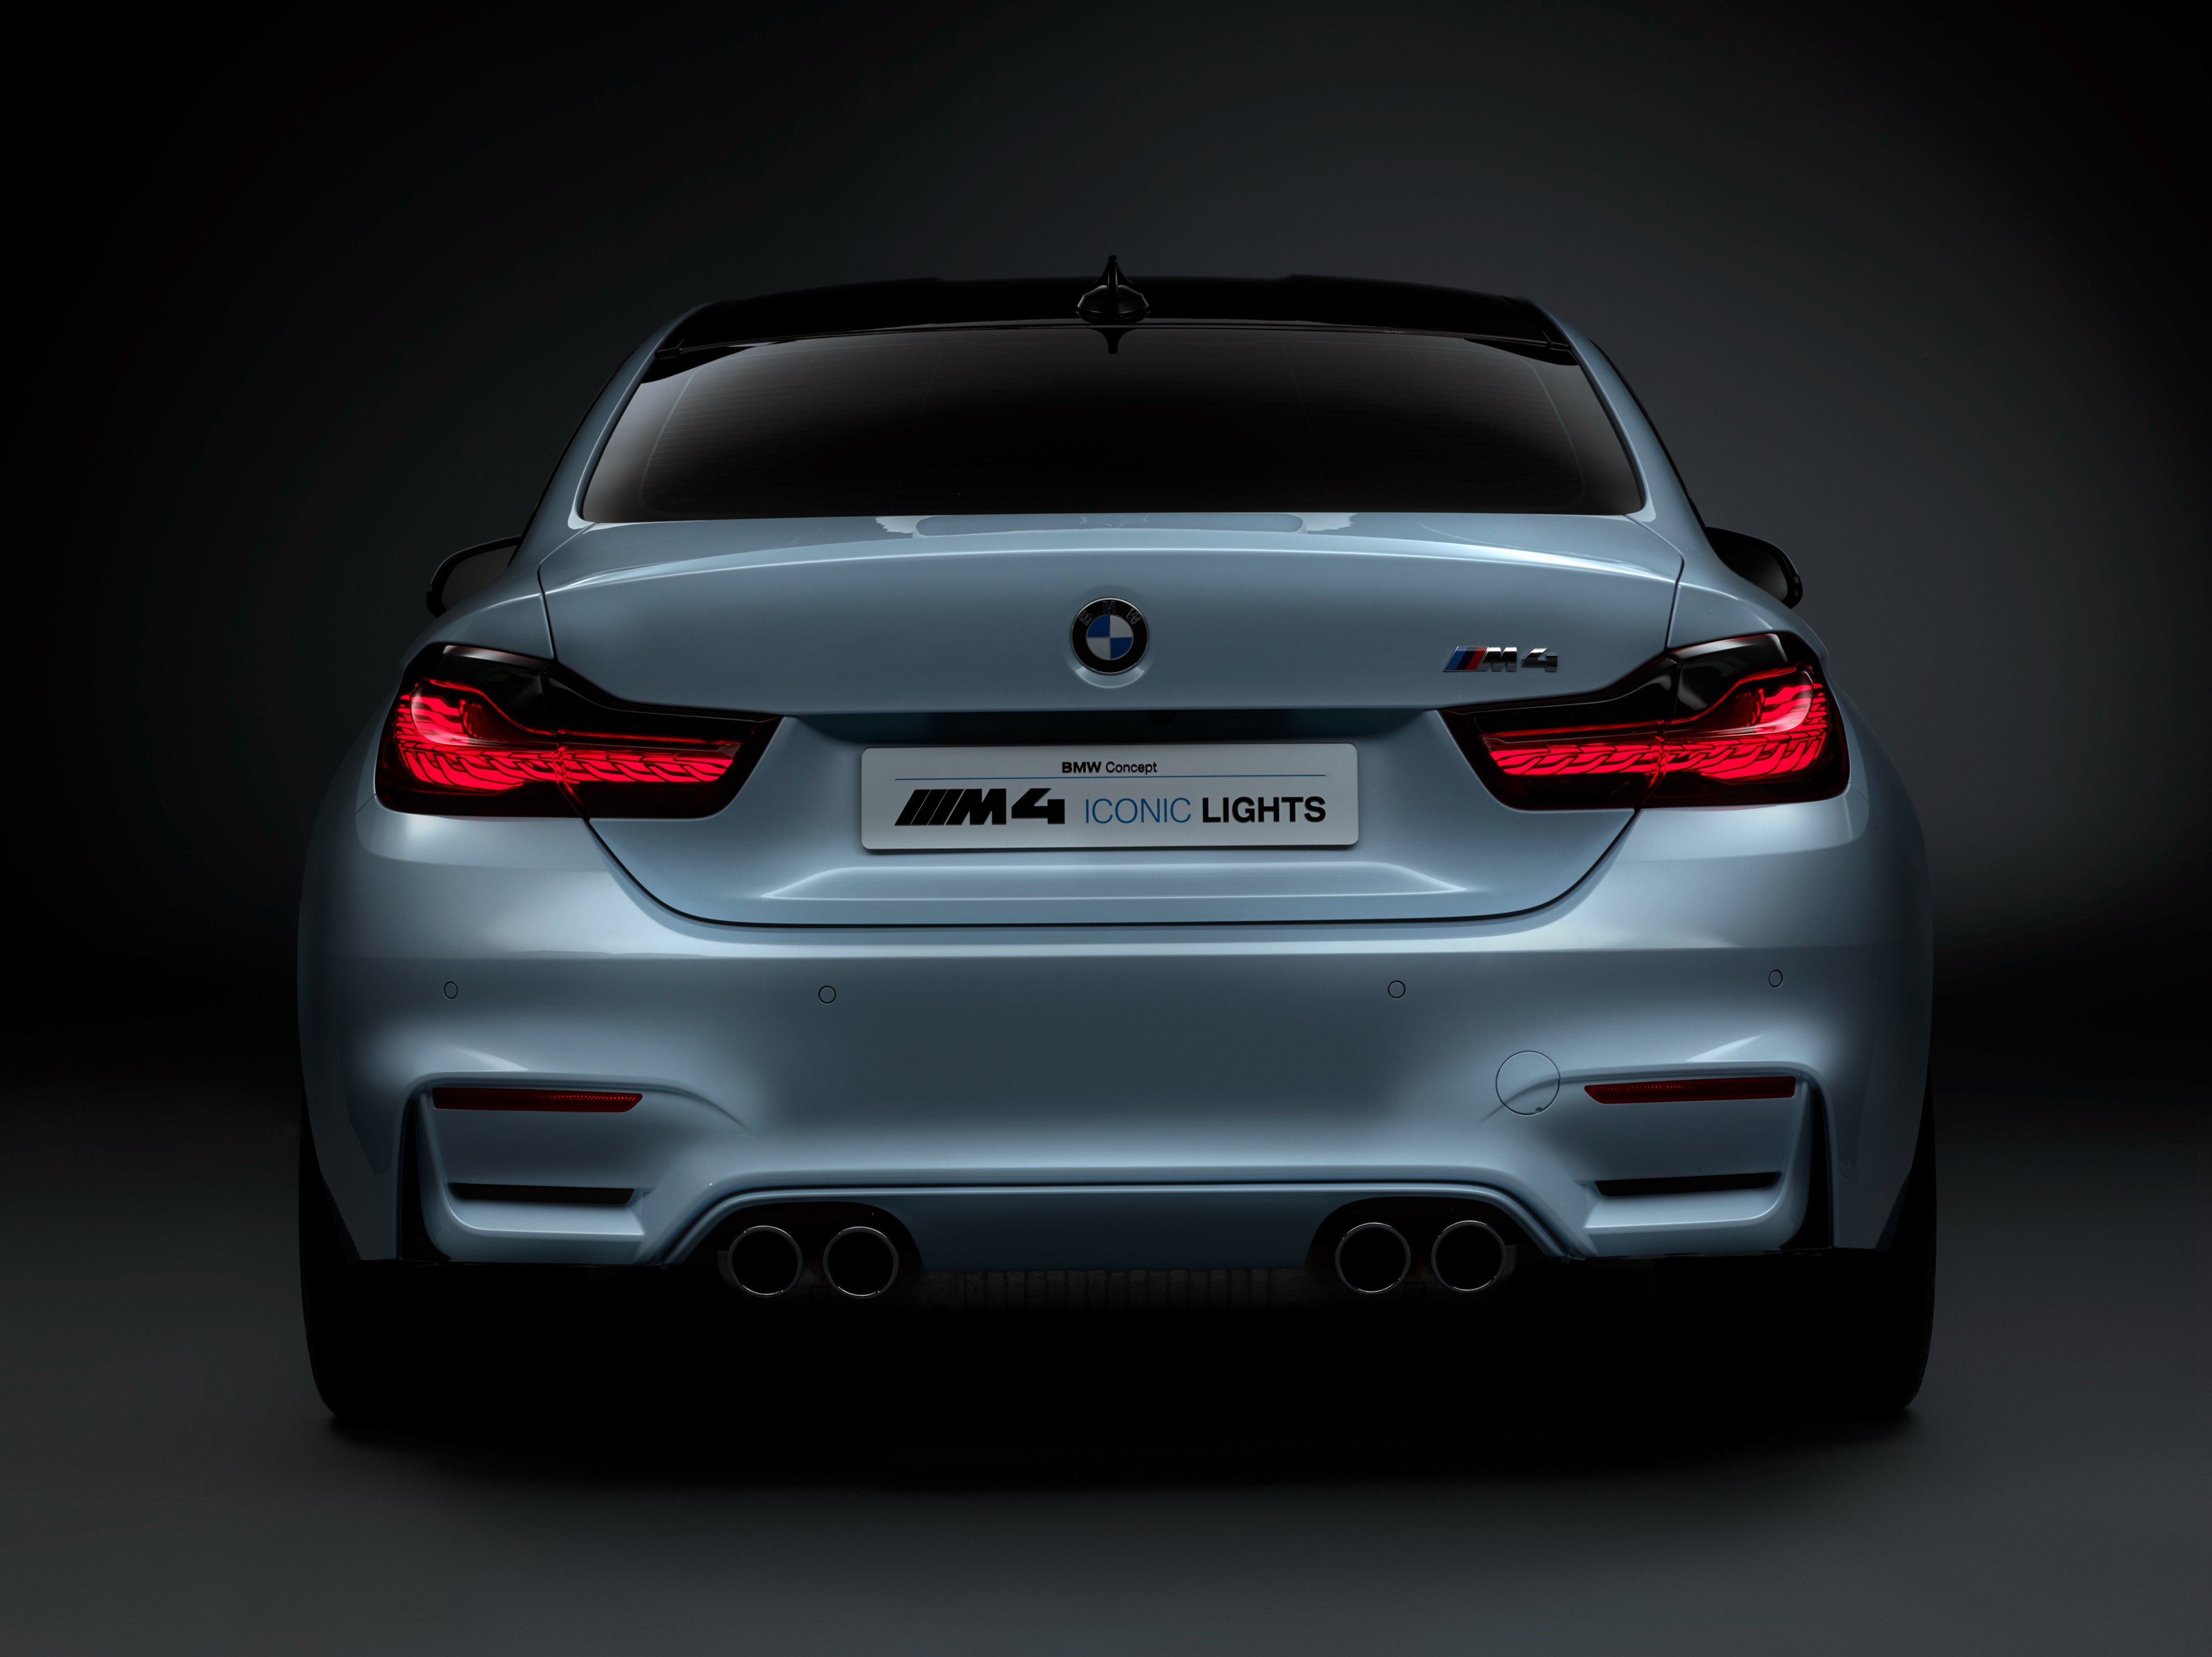 2015, Bmw, Concept, M 4, Iconic, Lights, F82, Tuning, Electric Wallpaper